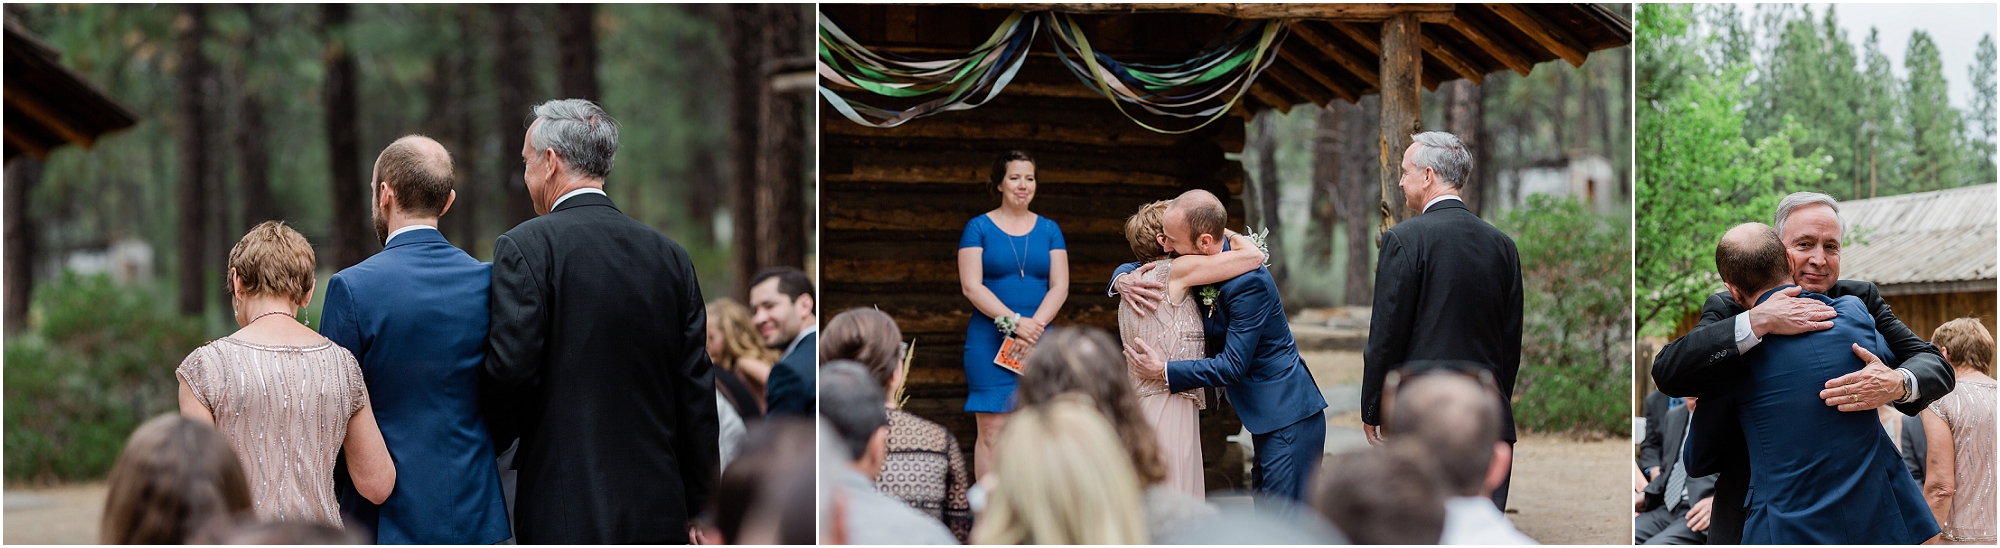 The groom hugs his parents before his rustic cabin wedding ceremony at the High Desert Museum homestead in Bend, OR. | Erica Swantek Photography